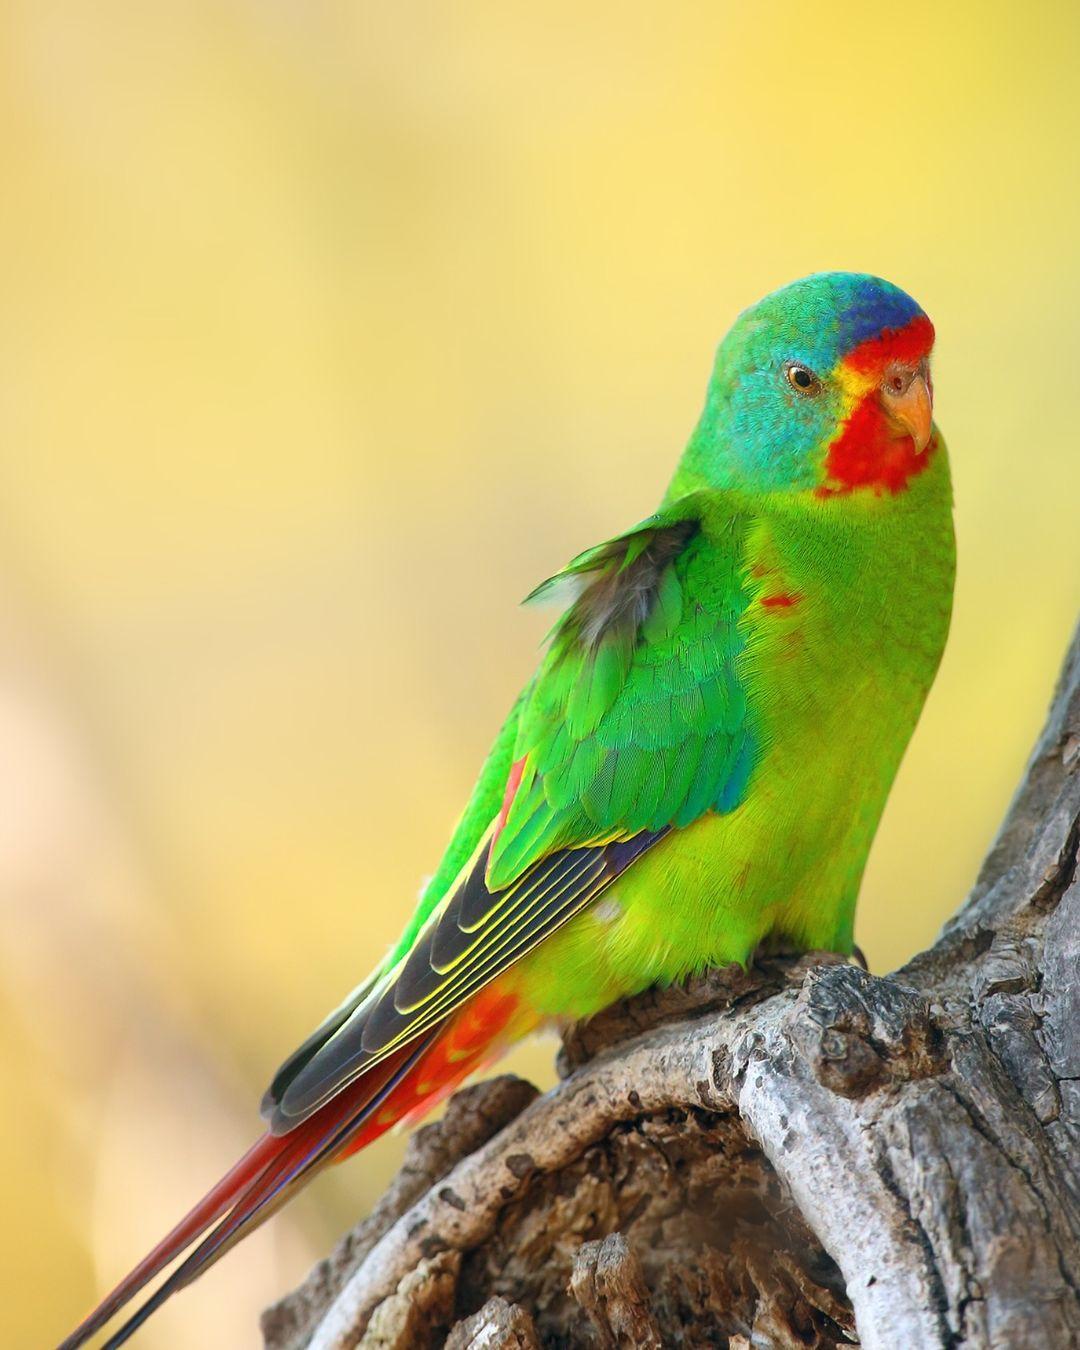 Australia Conservationists have won a temporary injunction to stop logging in the Tasmania nesting sites of the Critically Endangered Swift Parrot. Only an estimated 750 Swift Parrots remain, yet forest destruction has continued in their sole breeding sites in eastern Tasmania.

On January 31, the Tasmanian supreme court granted the injunction pending a hearing of the legal challenge brought by the @bobbrownfoundation. A recent report highlights the shocking scale of ongoing destruction, despite the recommendation from the IUCN Red List of Threatened Species to halt logging of native forests where these parrots nest.

The Australian government has promised that it will prevent any new extinctions. Conservationists continue to encourage them to uphold their zero extinction commitment. The only way to protect the Swift Parrot, and hundreds of other threatened Australian forest species, is to end native forest logging across Australia and Tasmania.

Join my organization @rewild and pledge your support to protect the remaining breeding habitat of Swift Parrots in Tasmania - link in bio.

Photo credit: Karel Bartik / Shutterstock

#Rewild #SaveSwifties #BobBrownFoundation #TheForestsPledge #EndNativeForestLogging #FightForForests #ProtectNativeForest